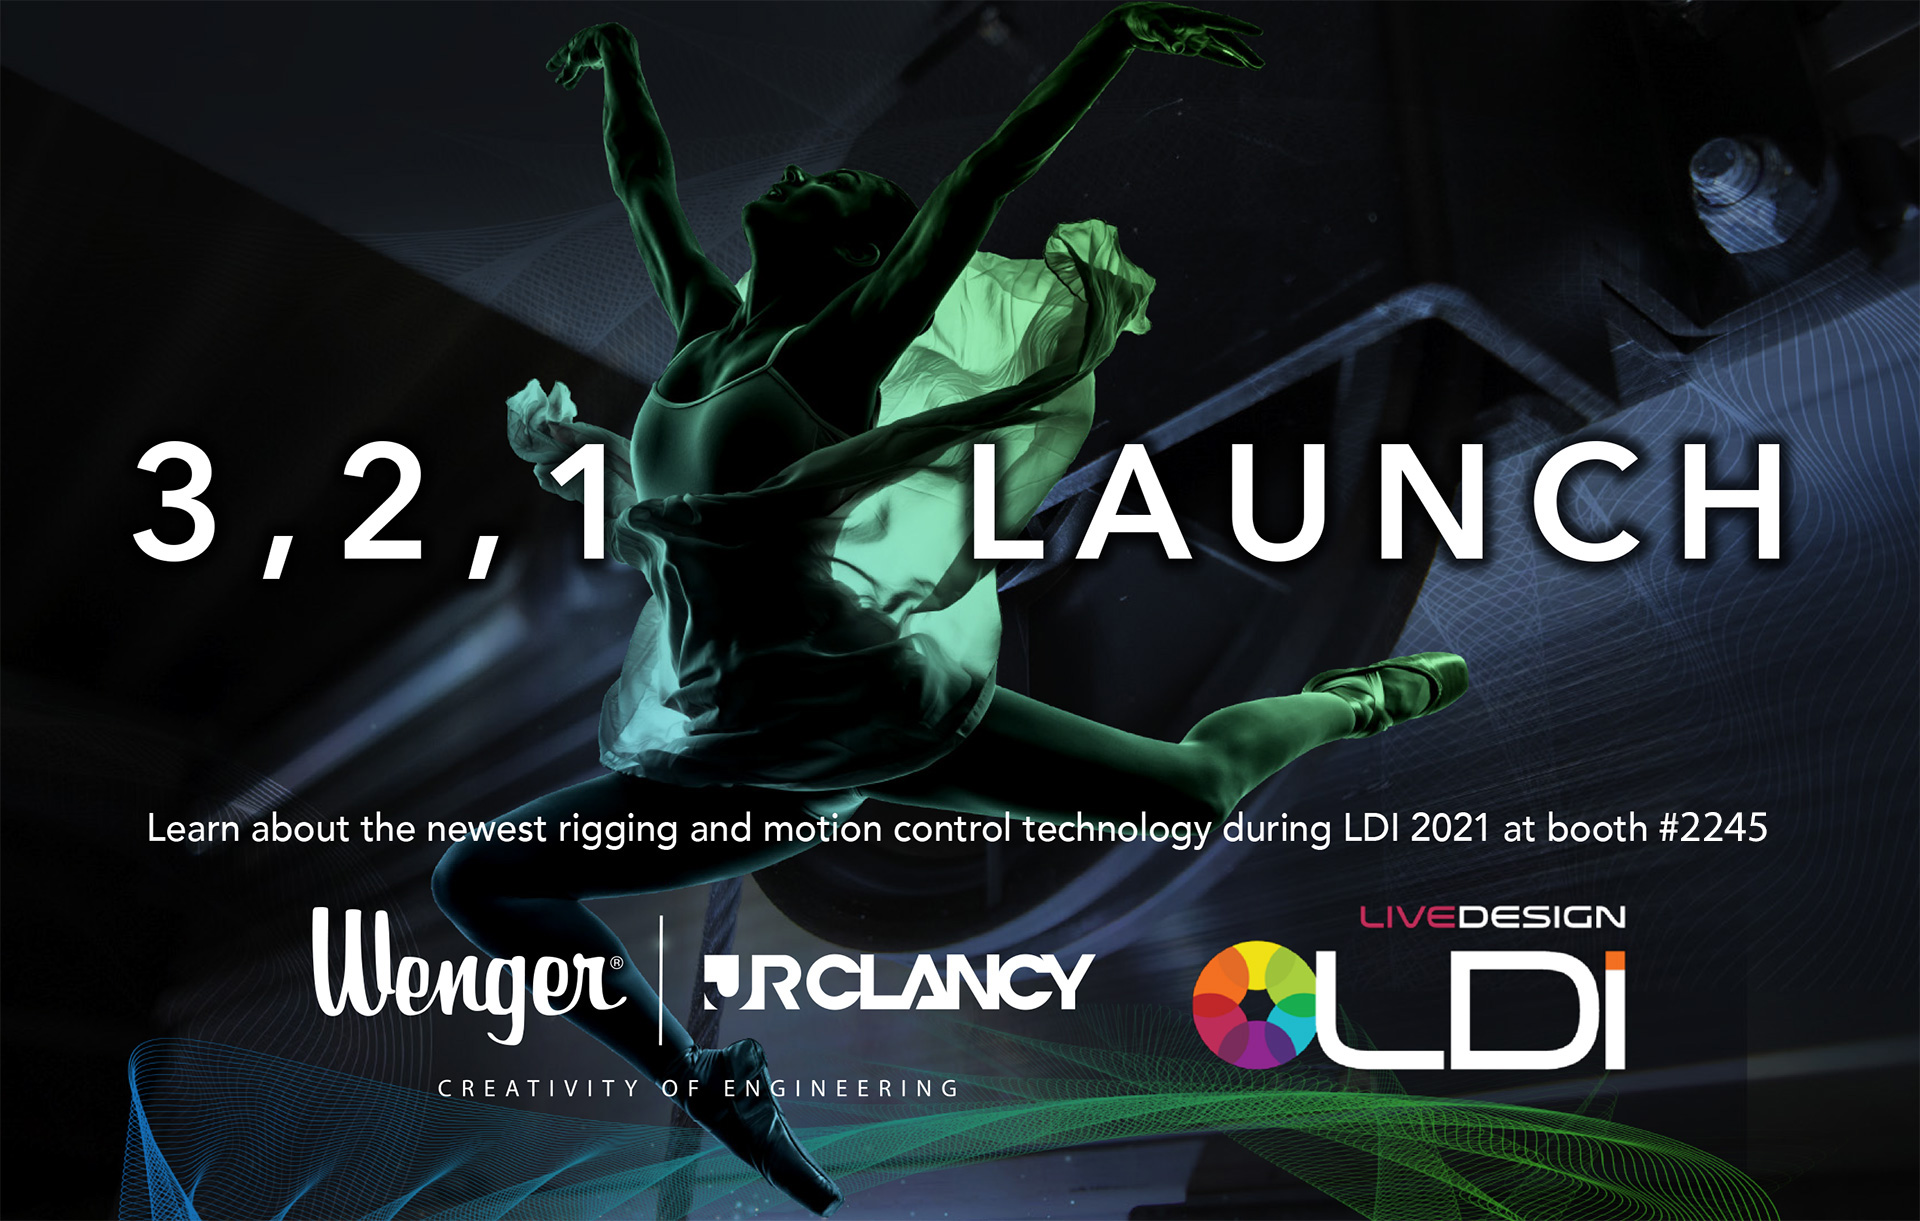 Learn about the newest rigging and motion control technology during LDI 2021 at booth #2245.